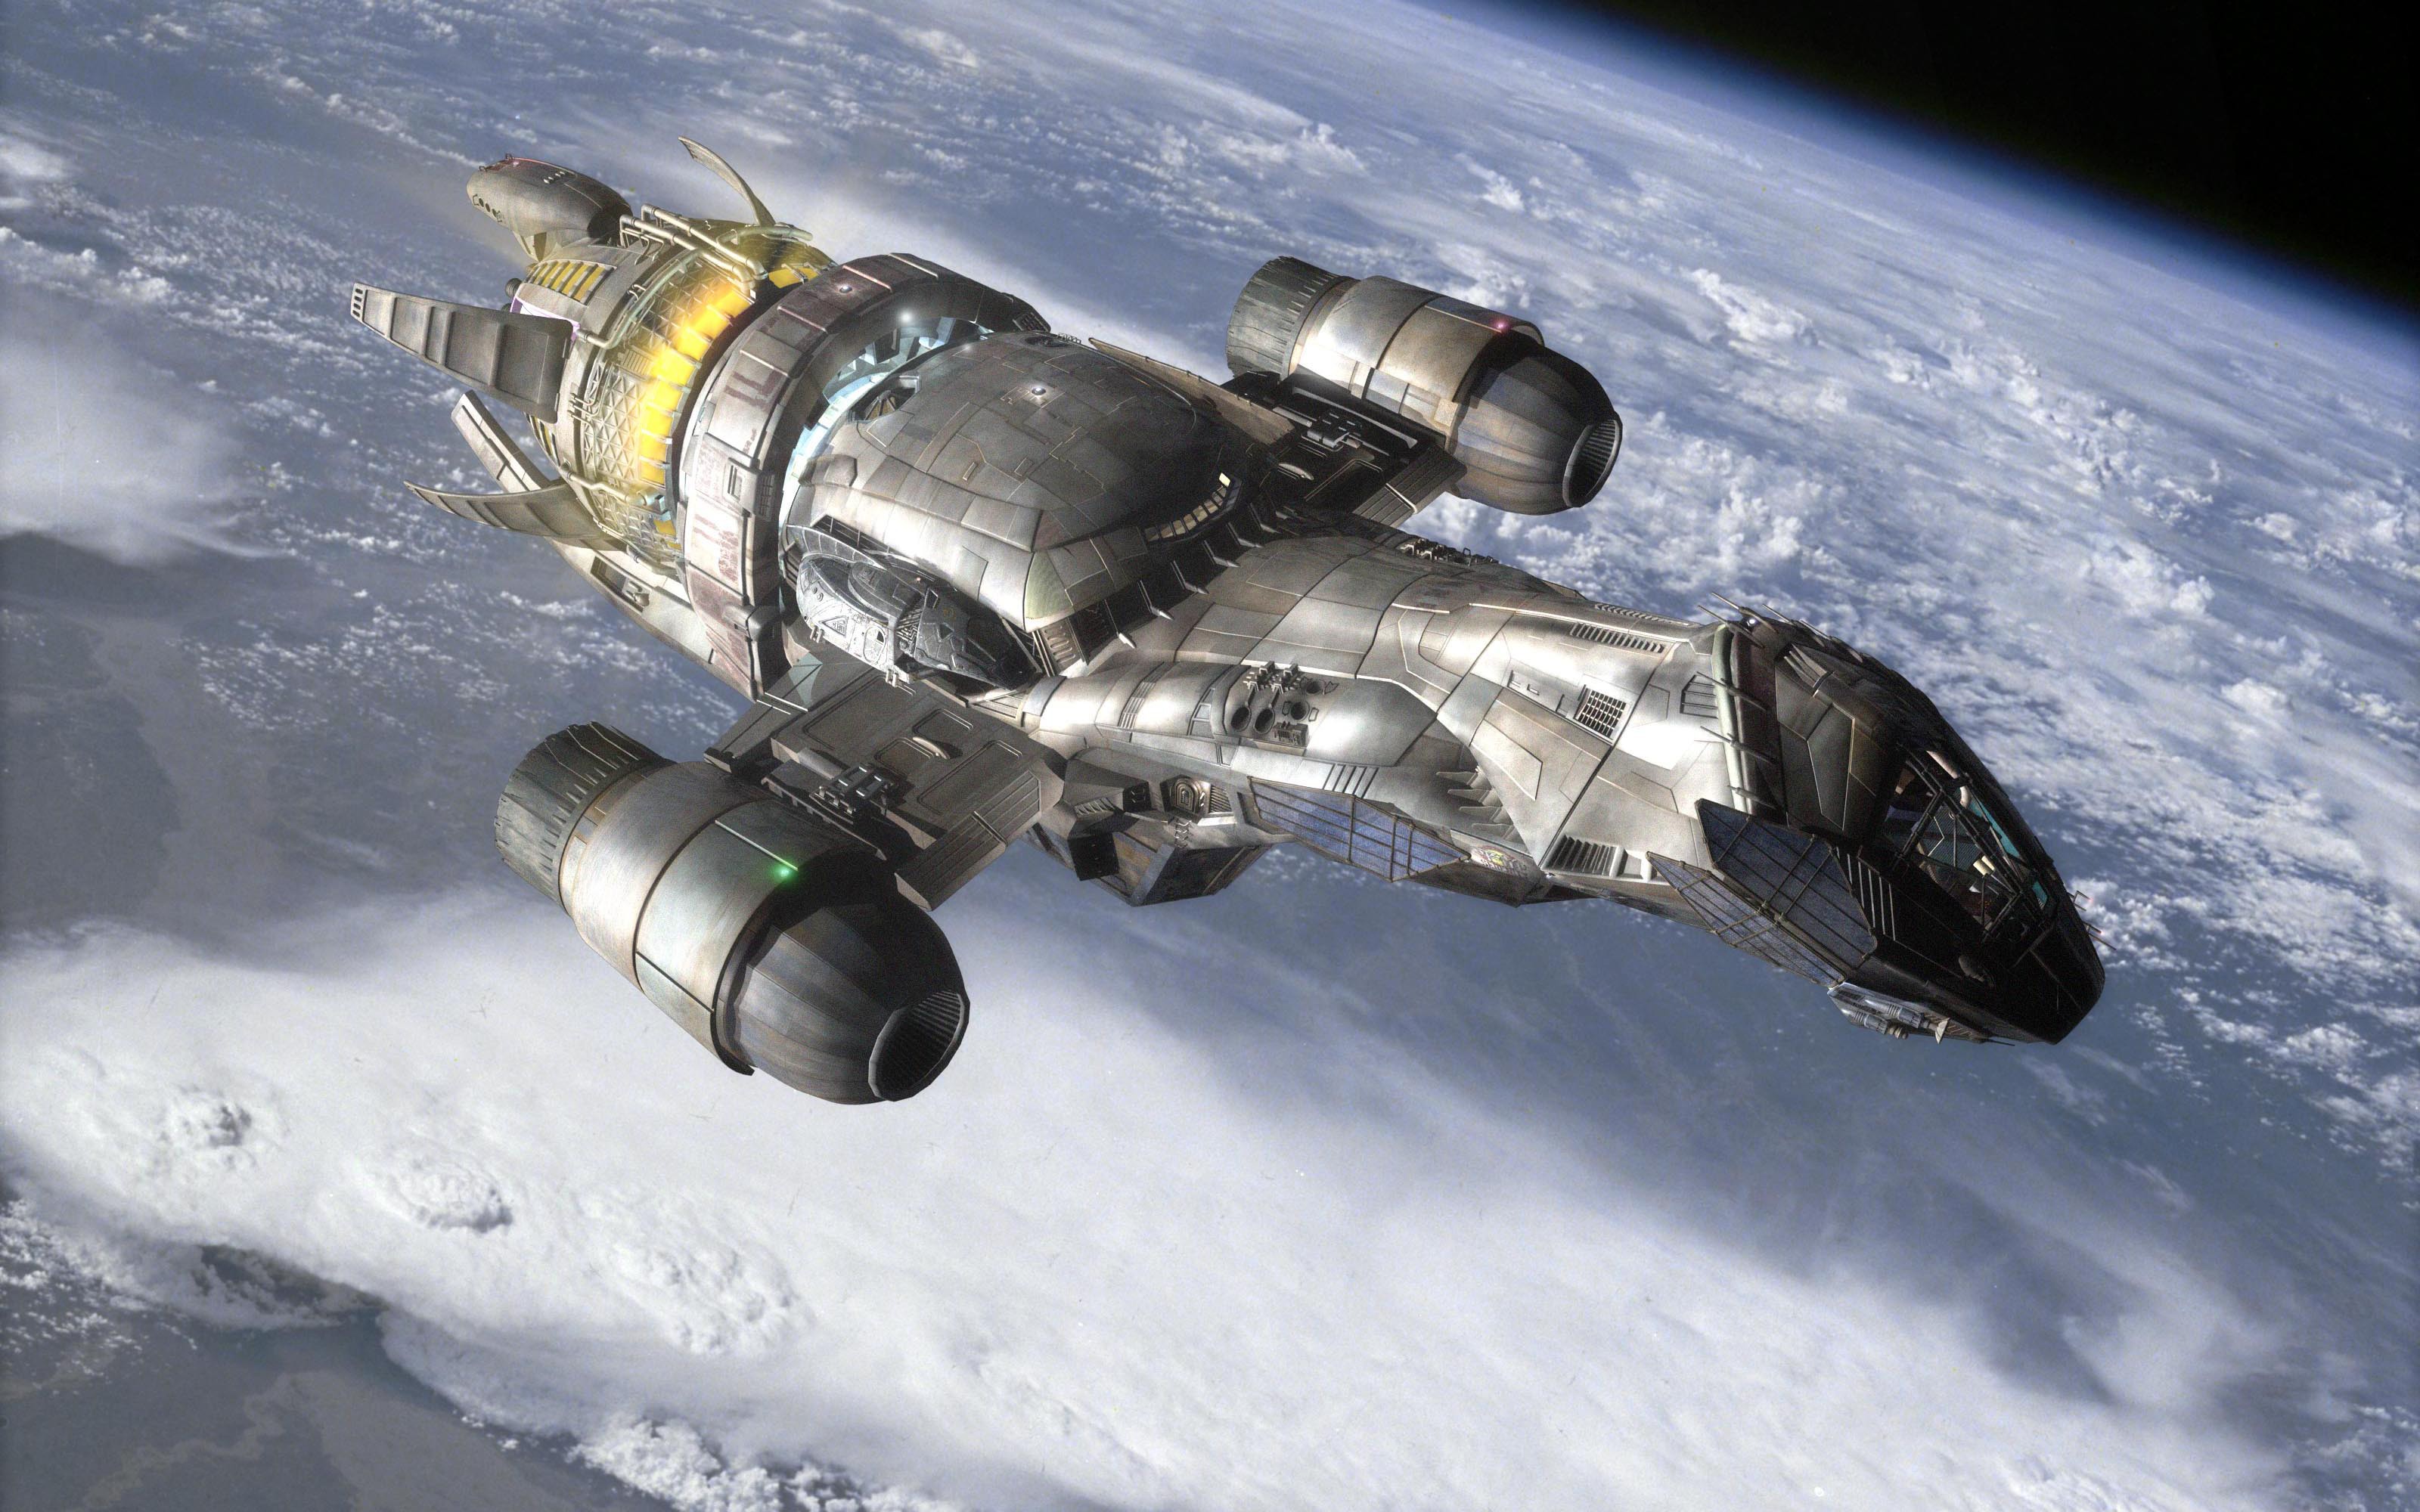 General 3200x2000 Serenity spaceship Firefly TV series science fiction planet vehicle digital art